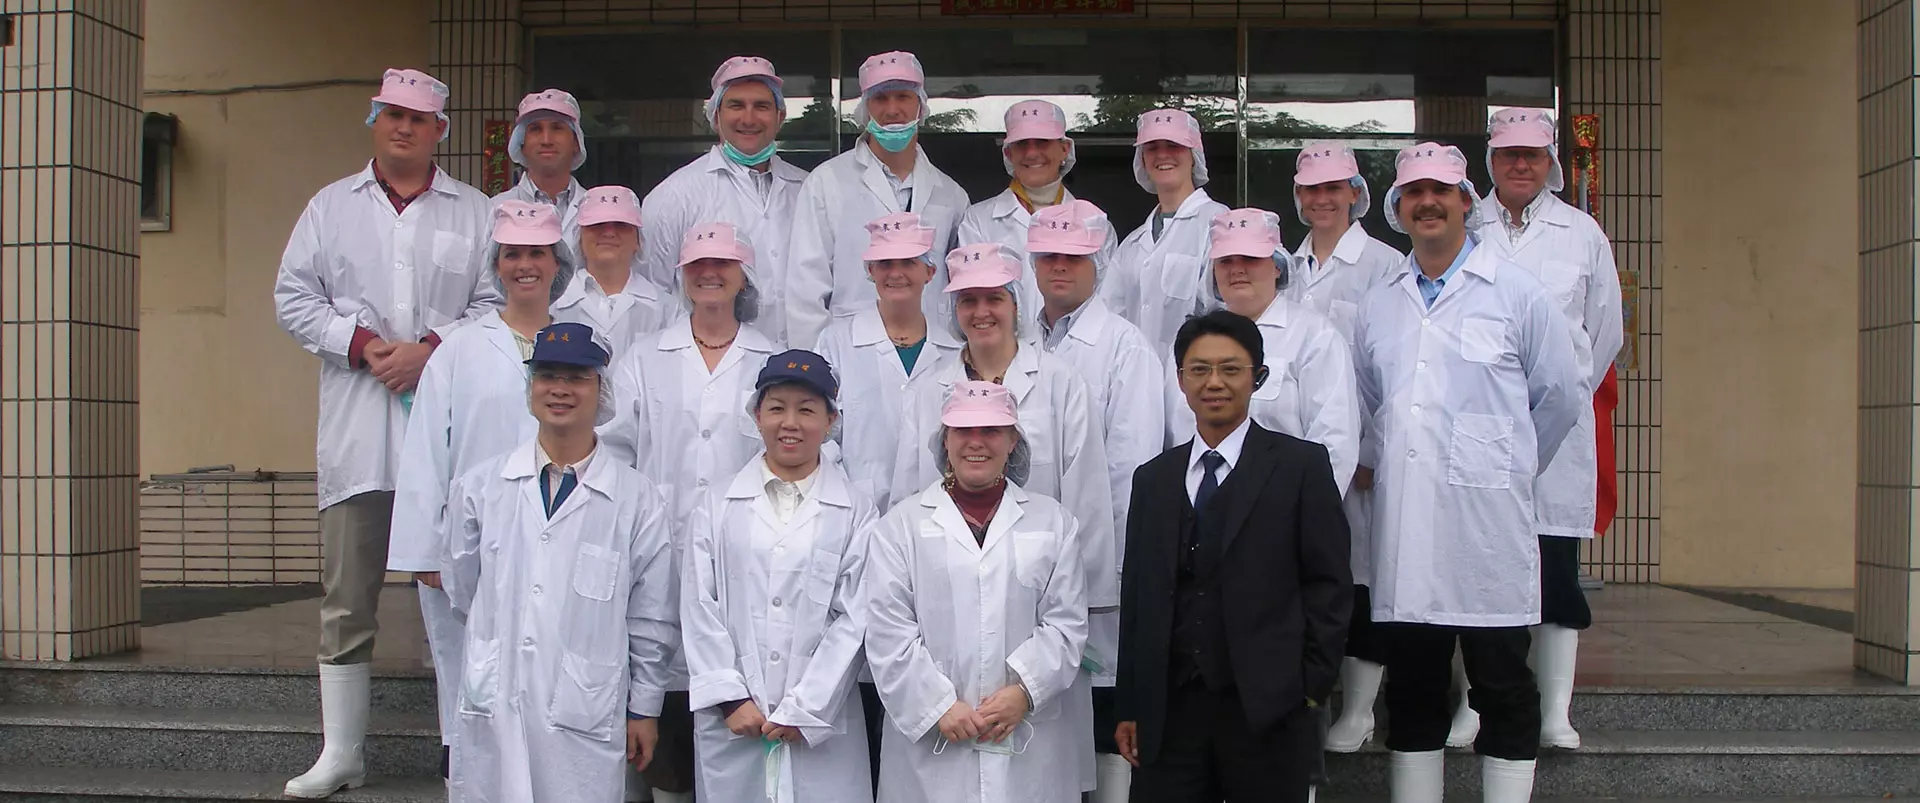 A group of people in white lab coats and pink hats.